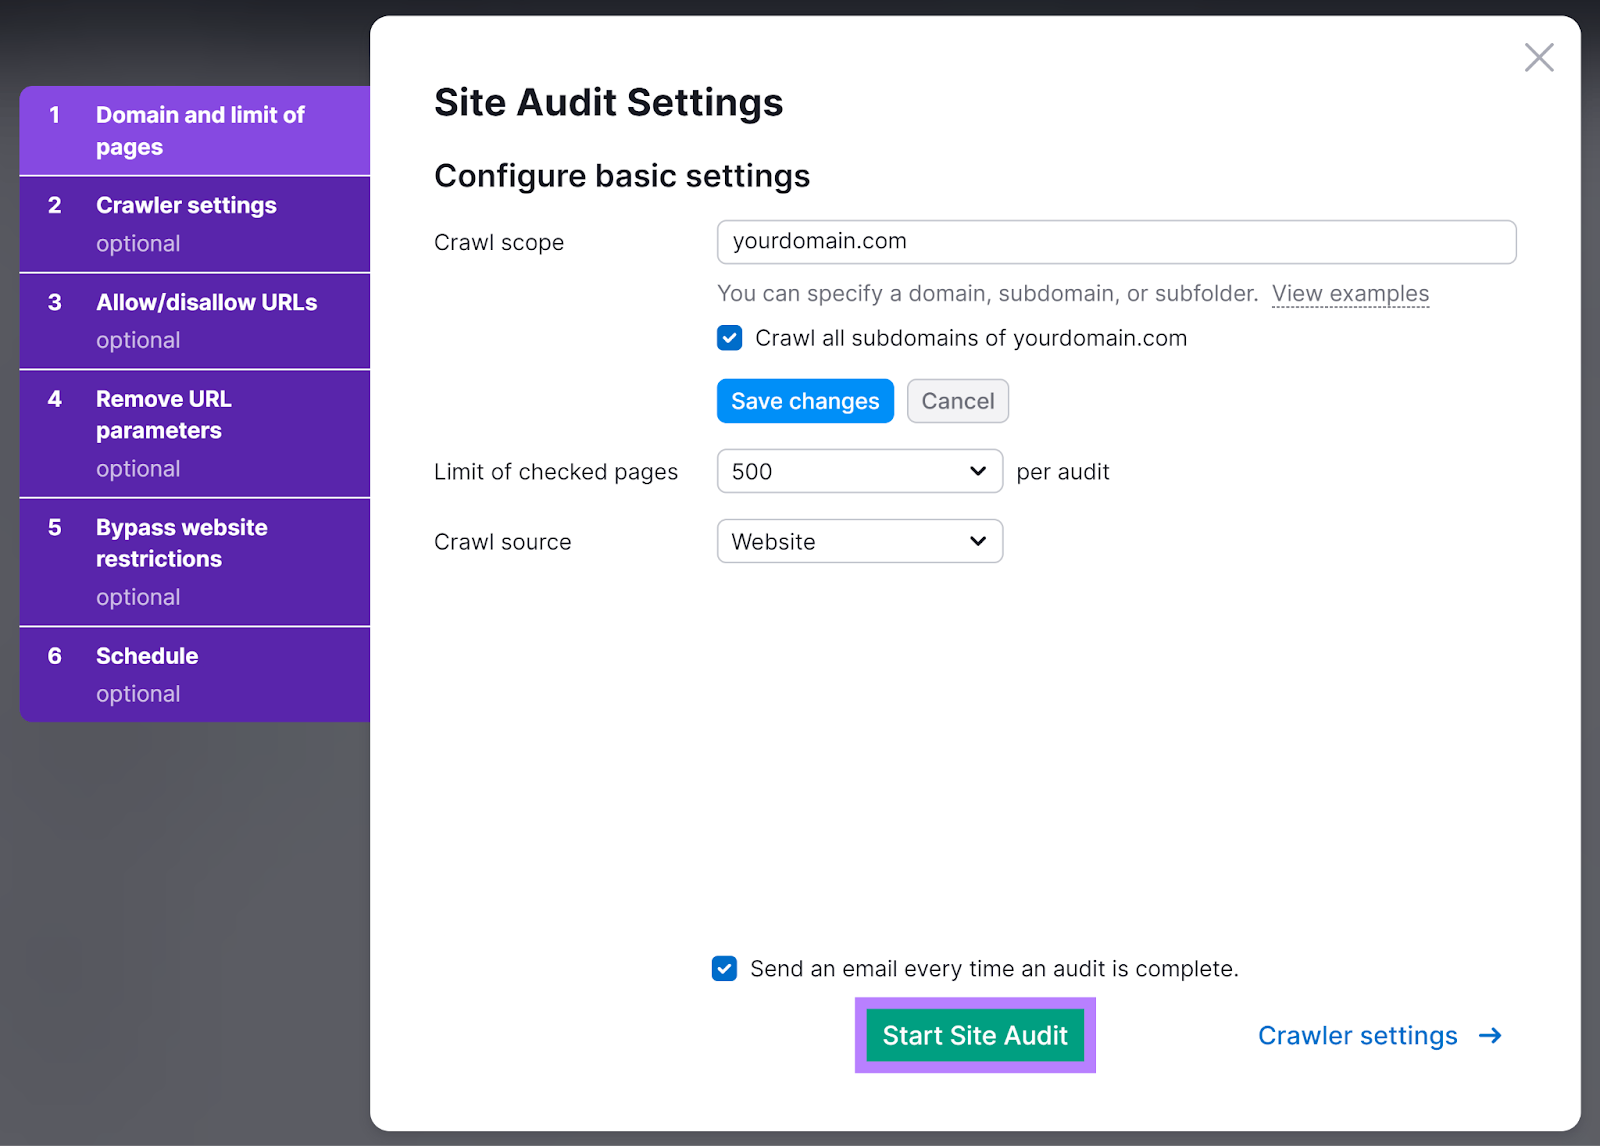 Site Audit settings configuration popup with Start Site Audit button highlighted.